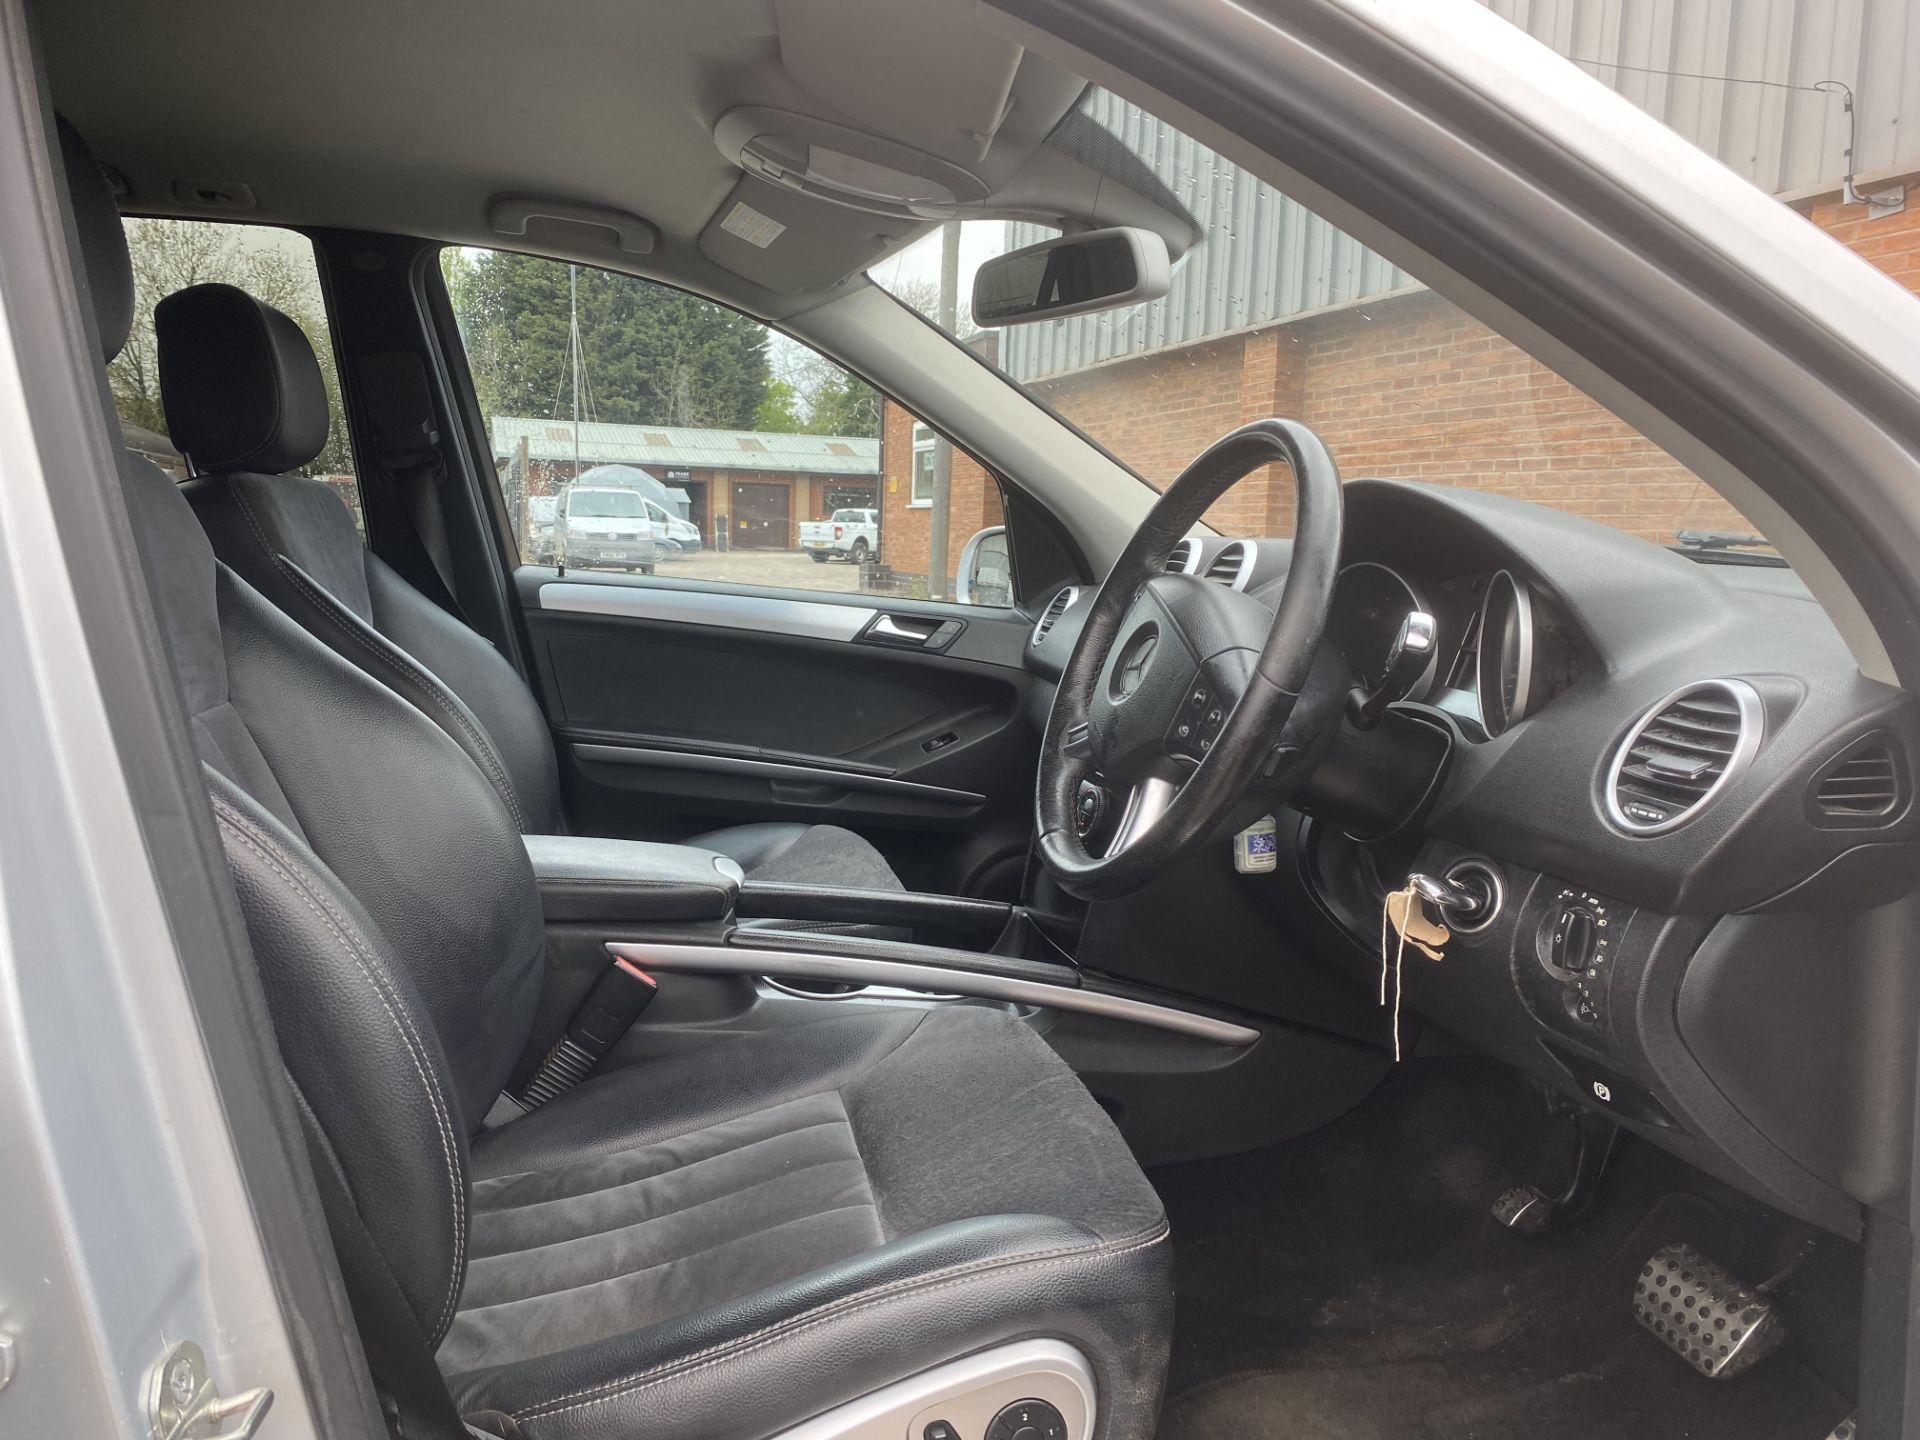 (Reserve Met) Mercedes ML280 Cdi (SPORT) Auto 3.0v6 Diesel - 2008 Reg - Only 94000 Miles Fsh Leather - Image 15 of 21